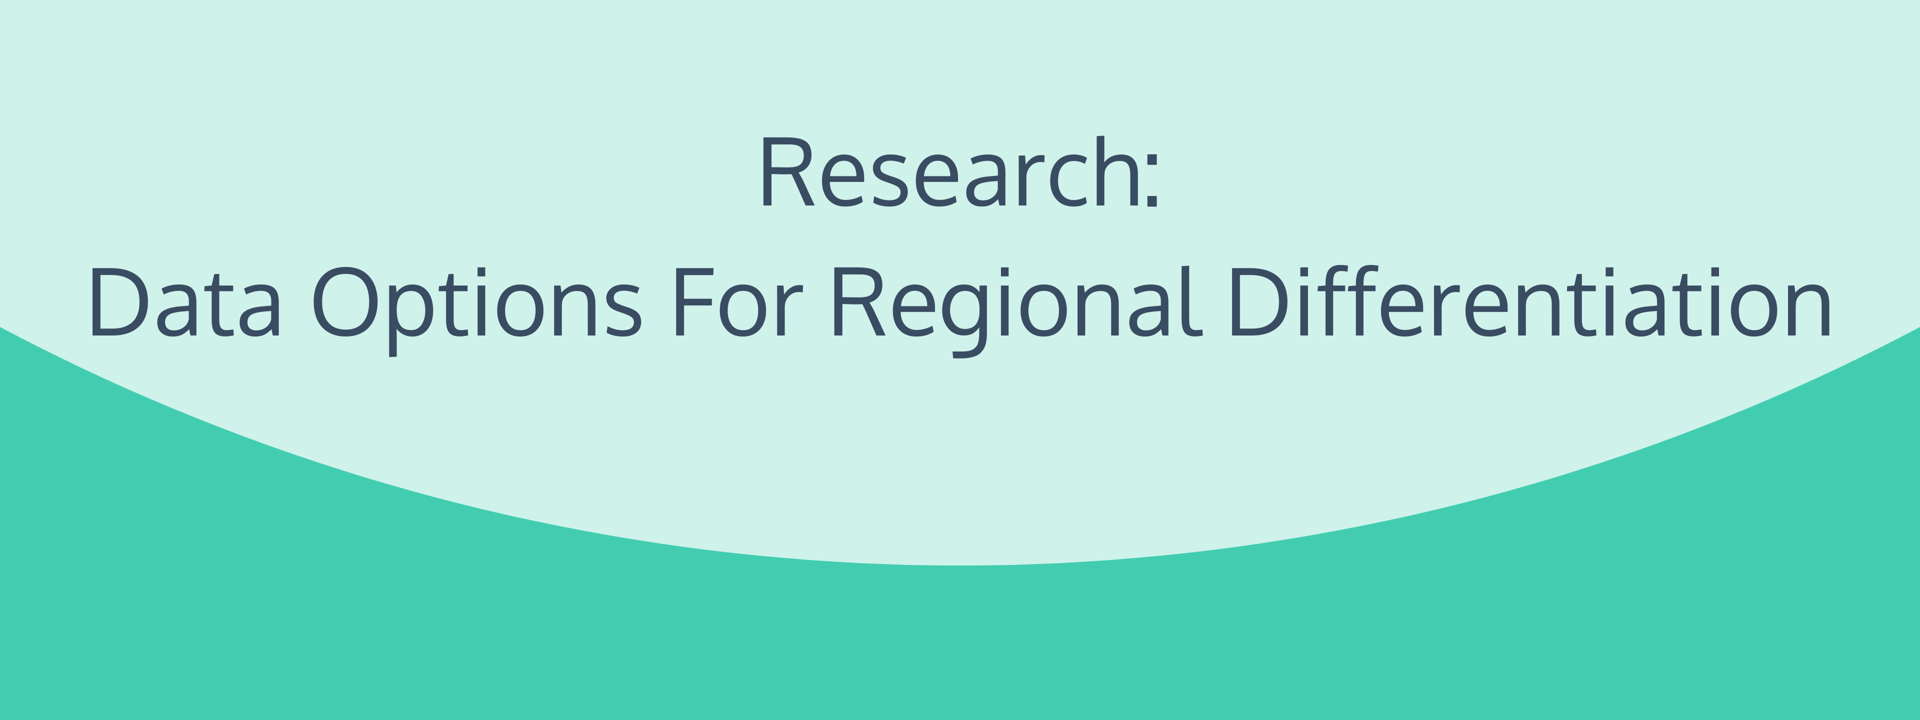 Research: Data Options for Regional Differentiation